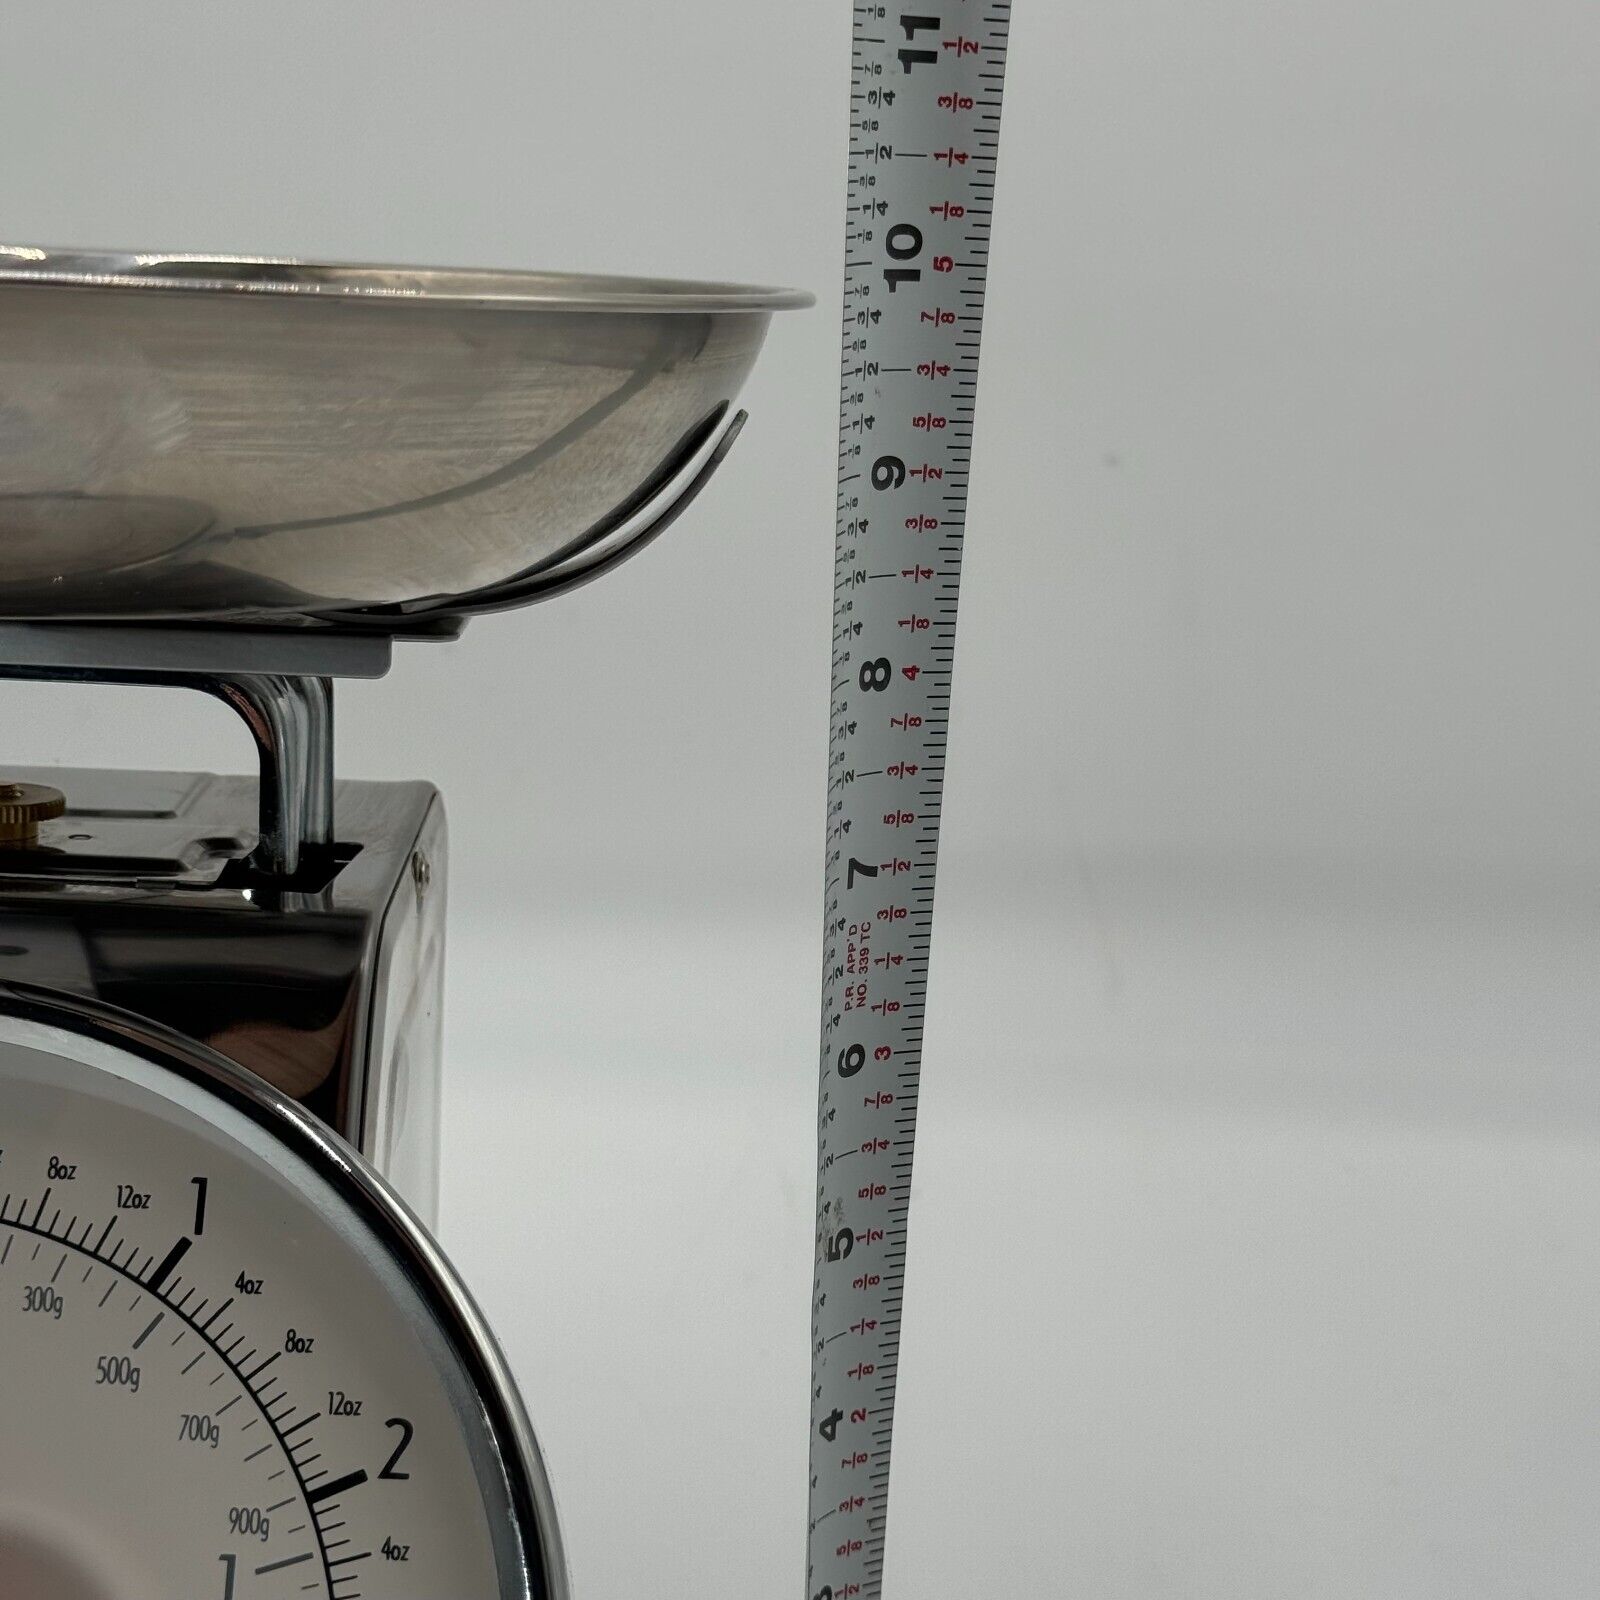 Taylor Scale Weighs up to 11 lbs Measures in Grams and Ounces Mechanical Retro